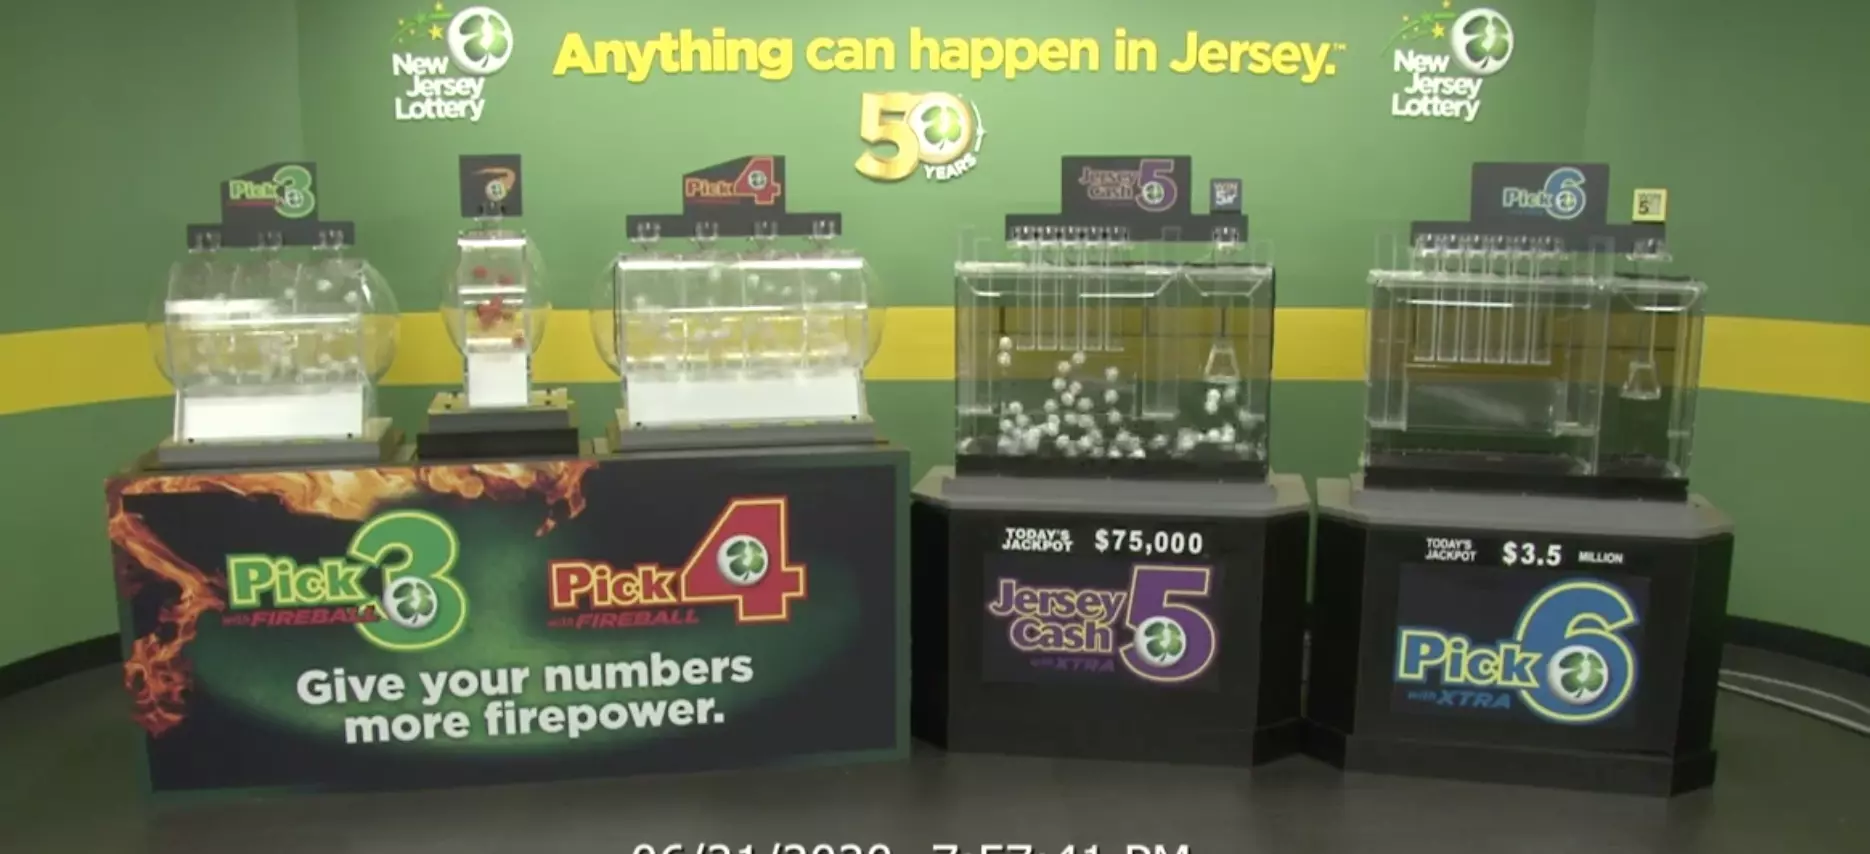 new jersey evening lottery